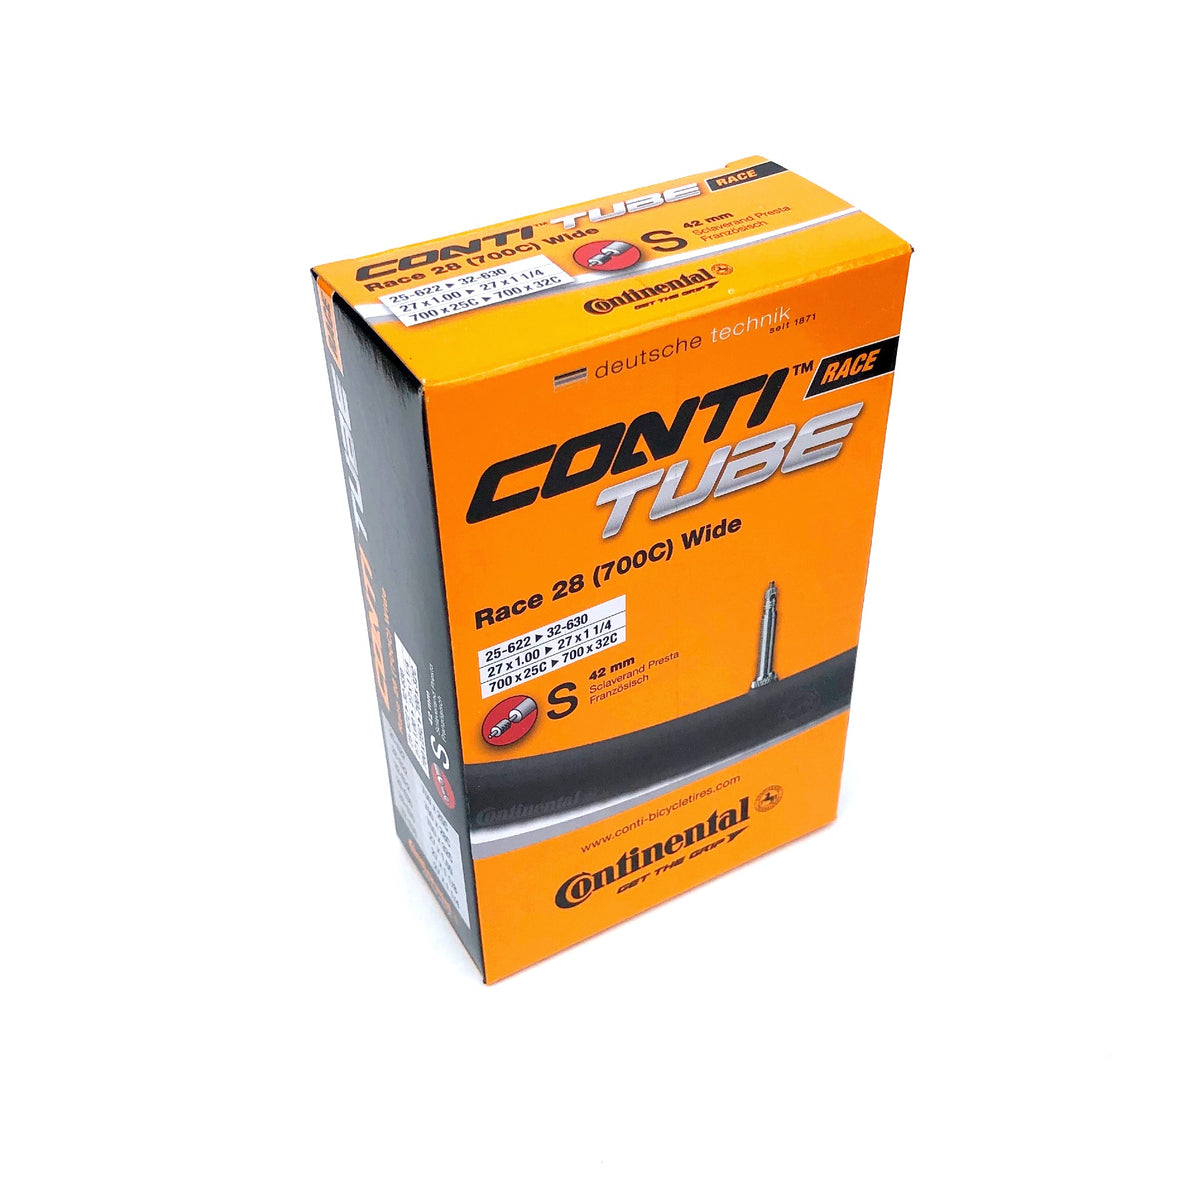 Continental Race Wide Tube 700 x 25-32mm